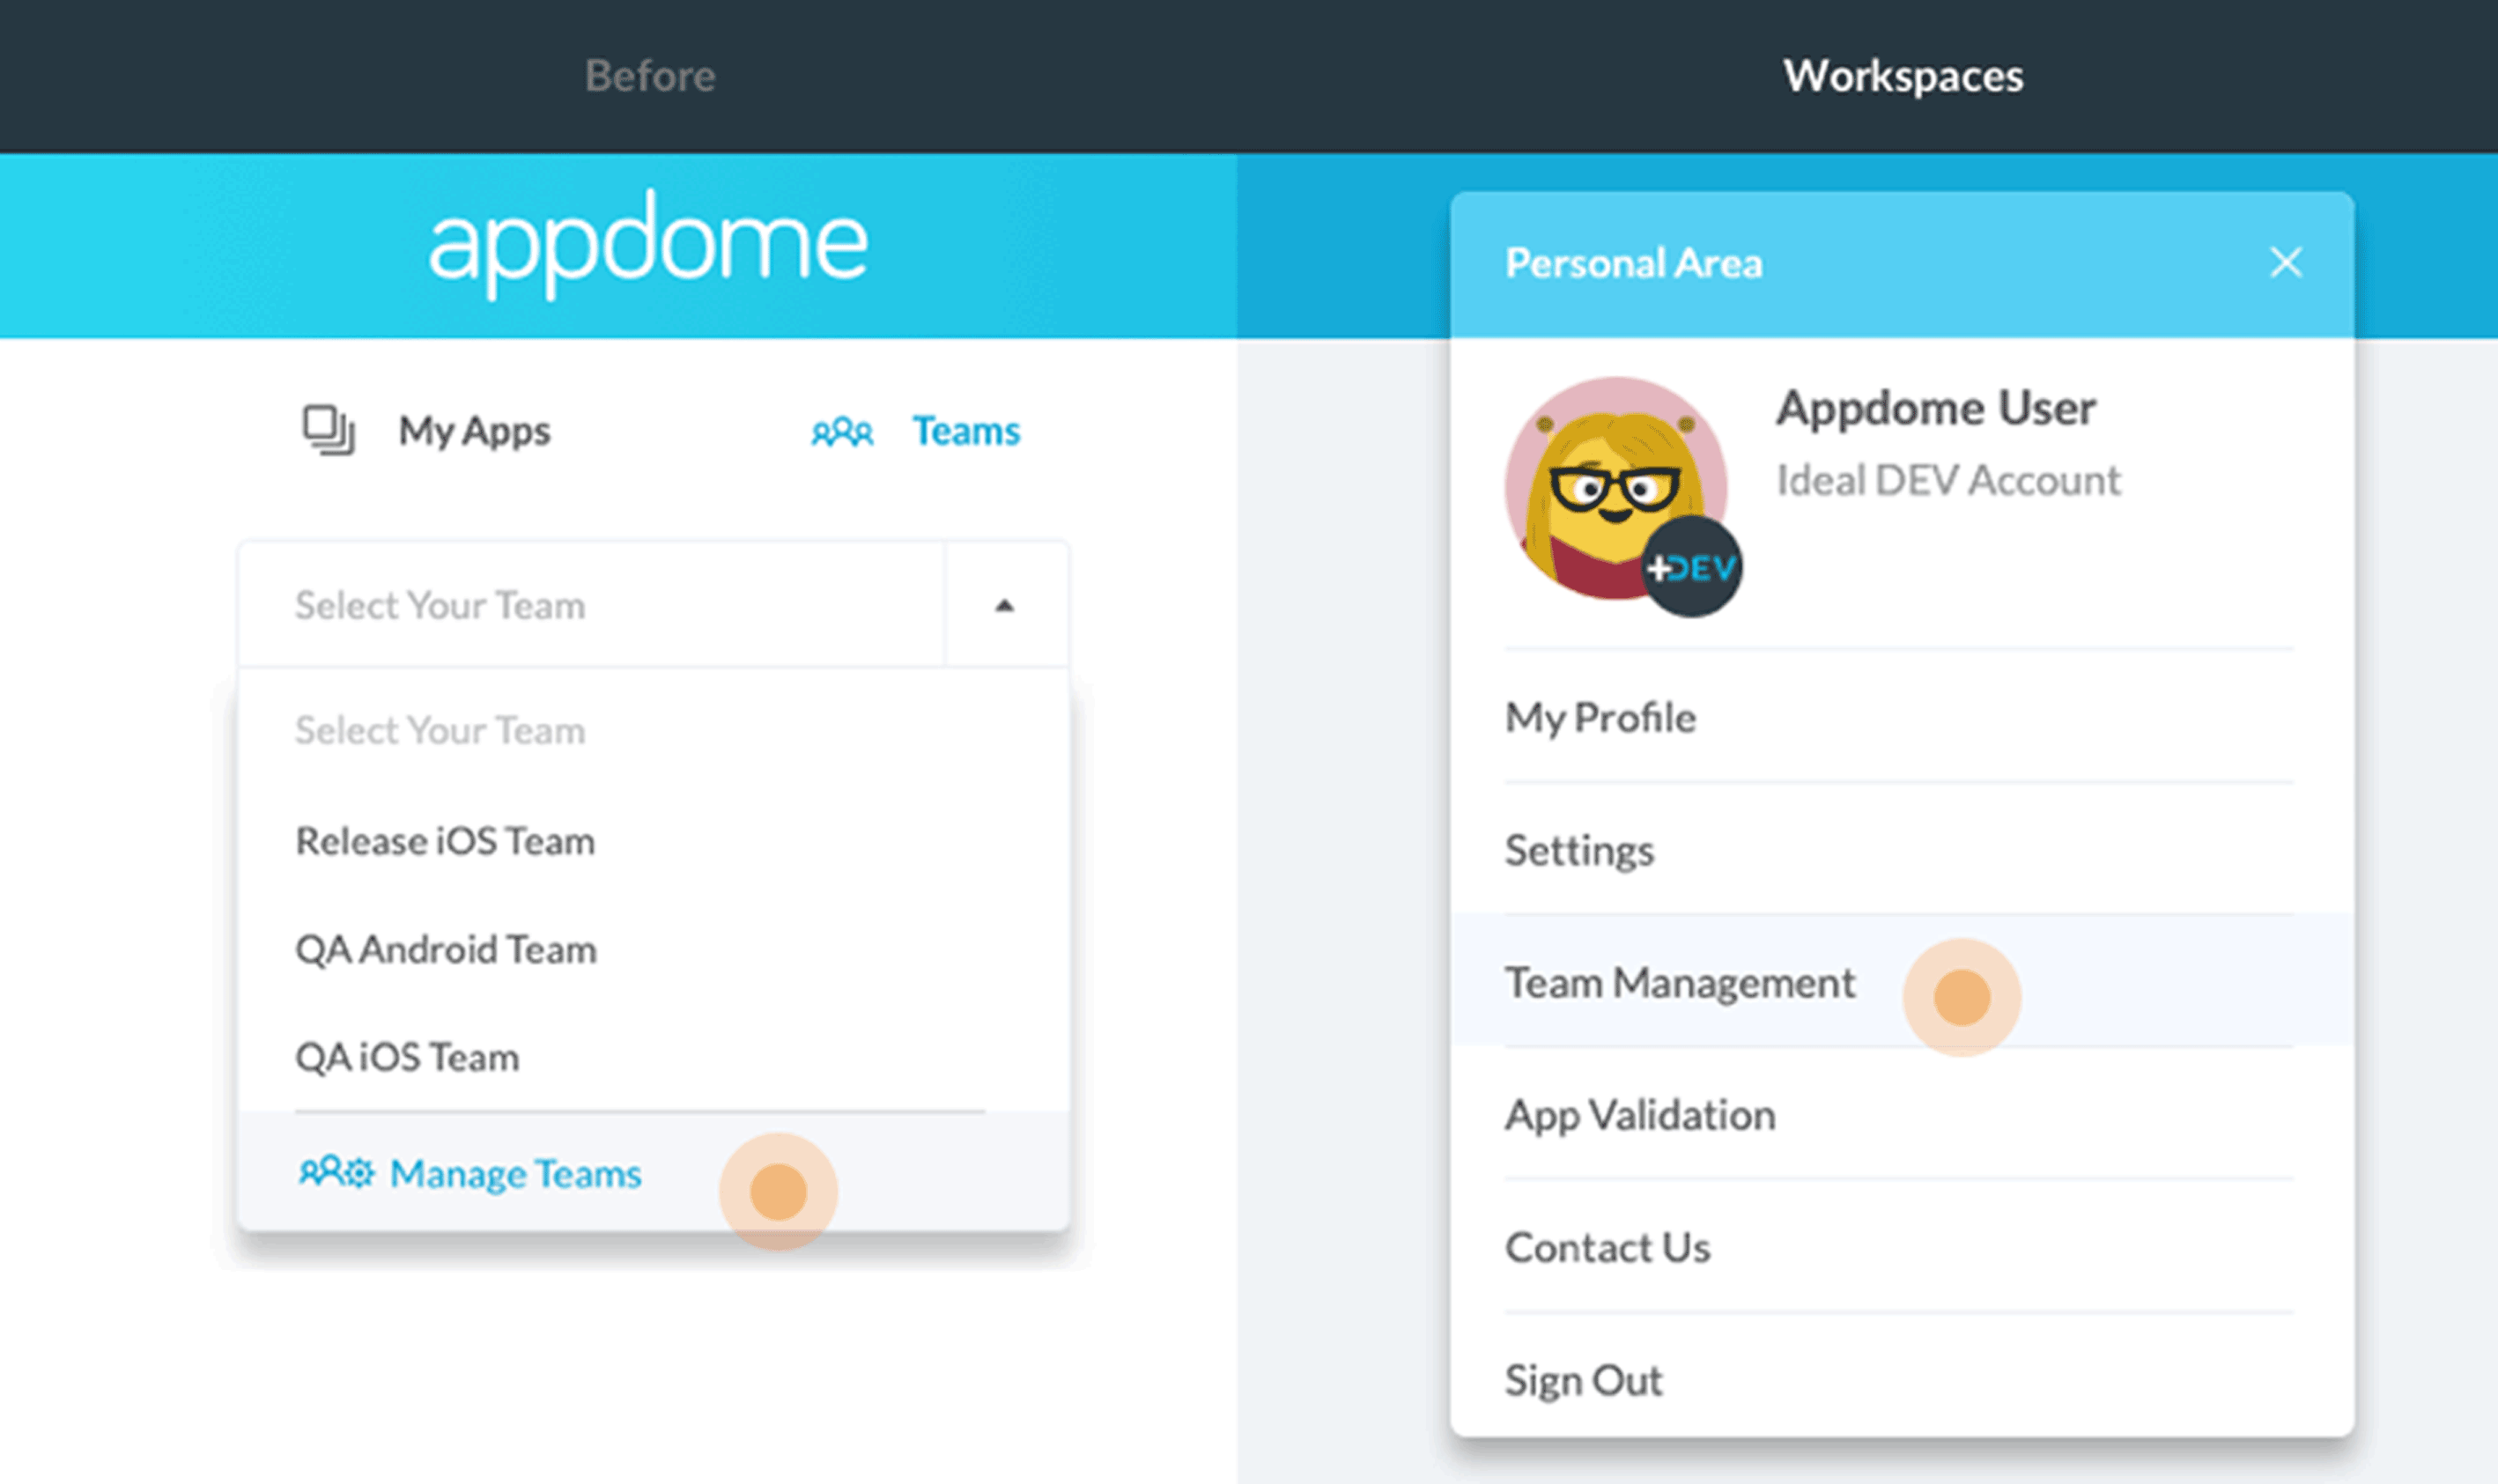 Appdome Teams New Workspaces